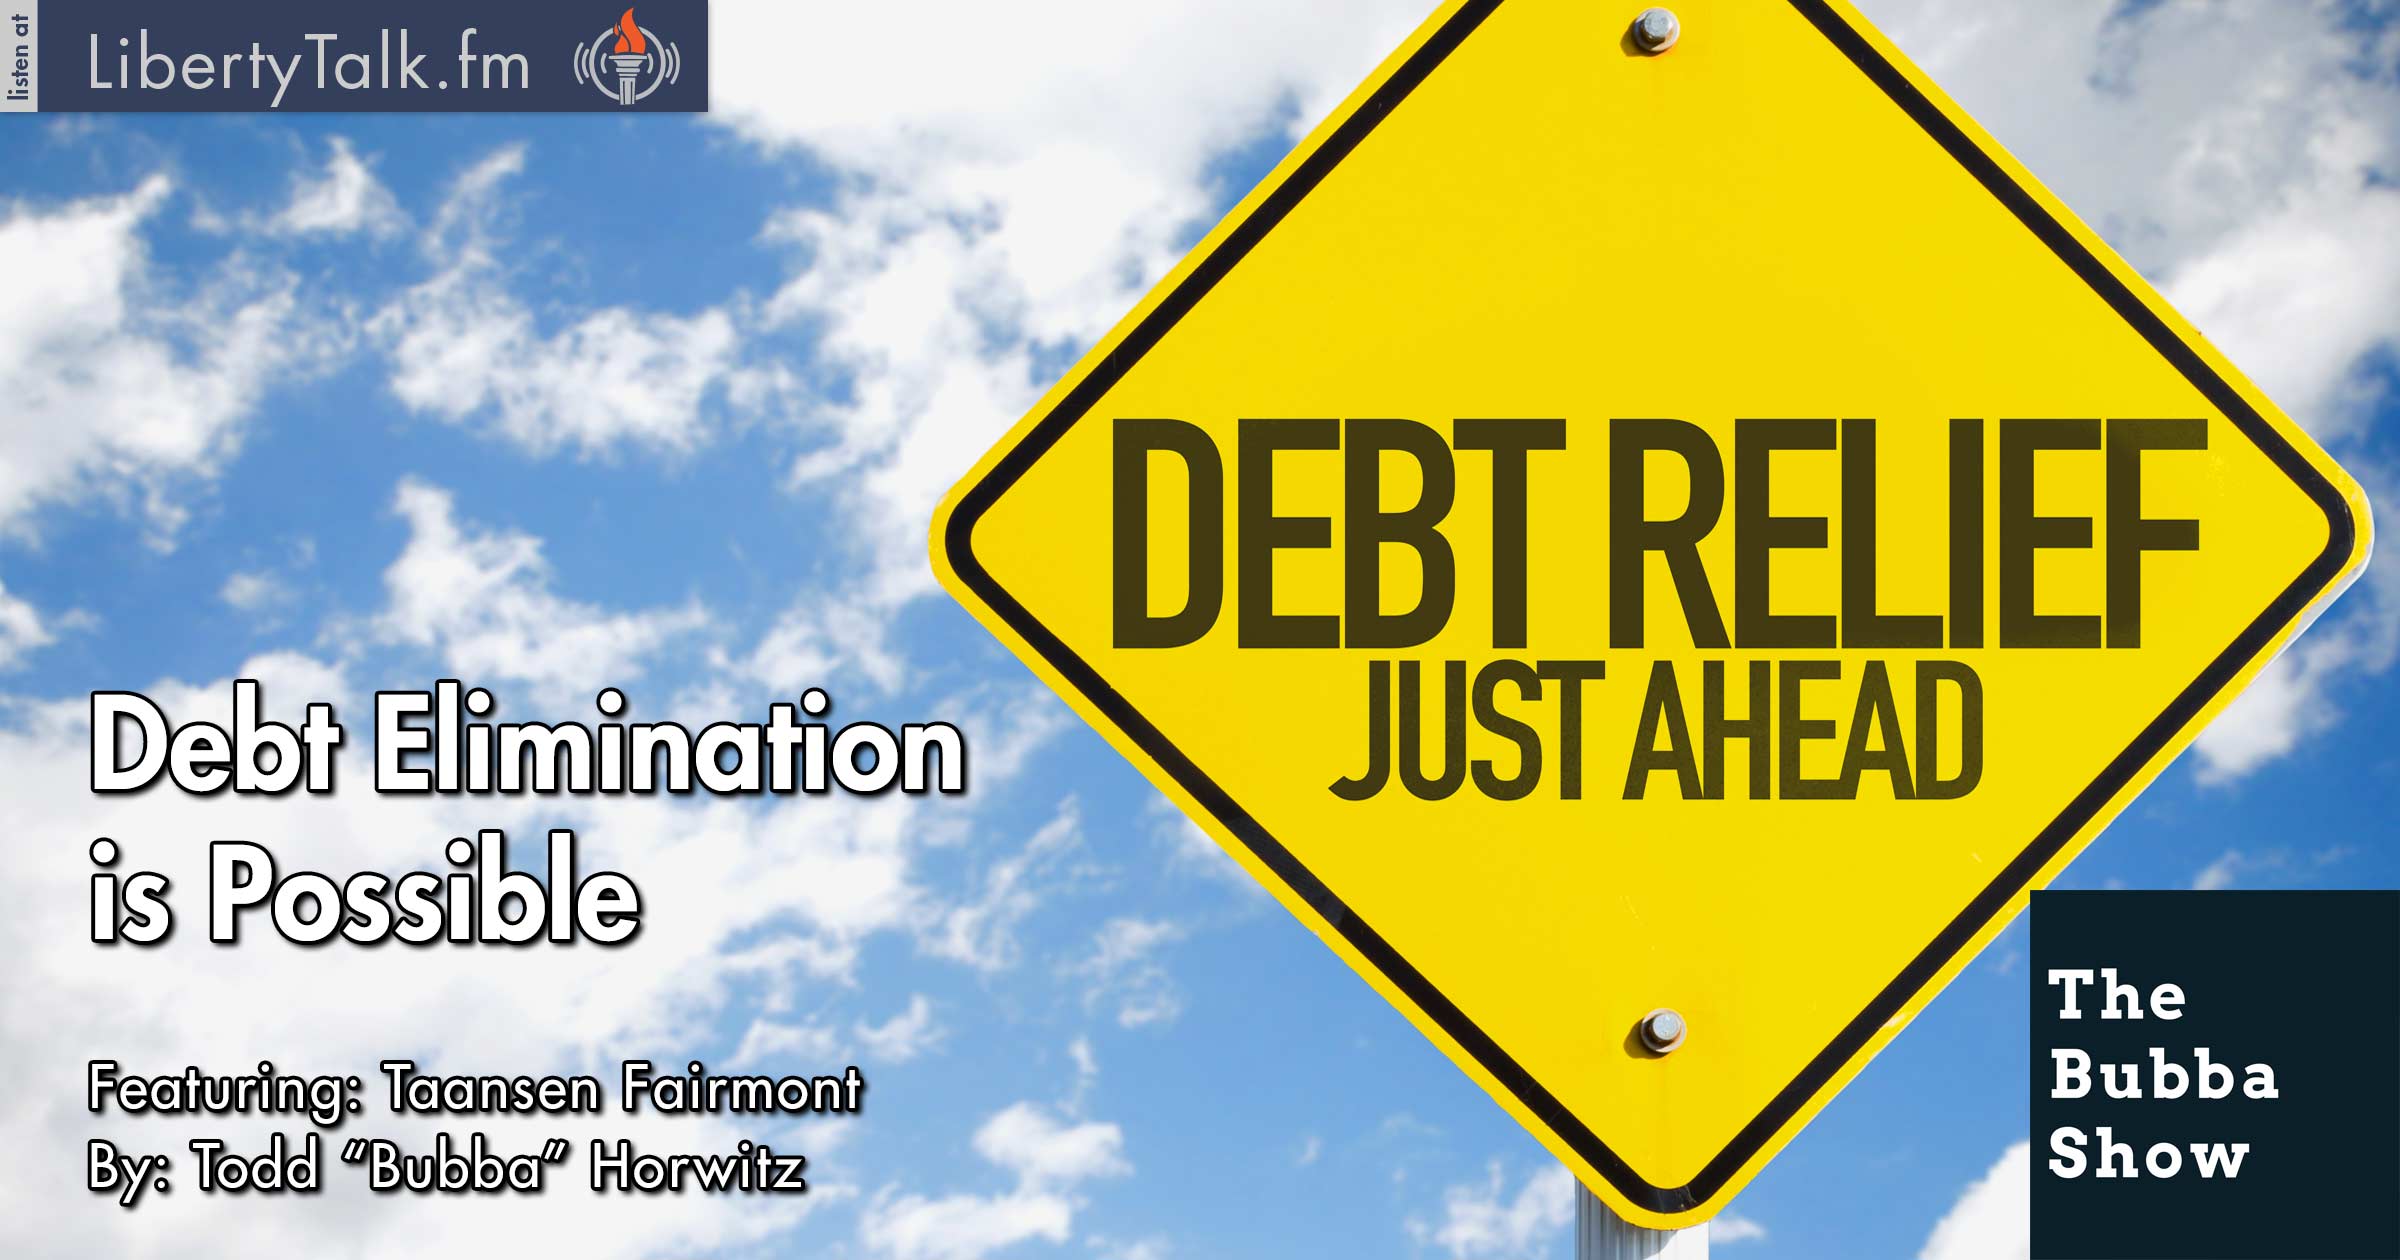 Debt Elimination is Possible - The Bubba Show